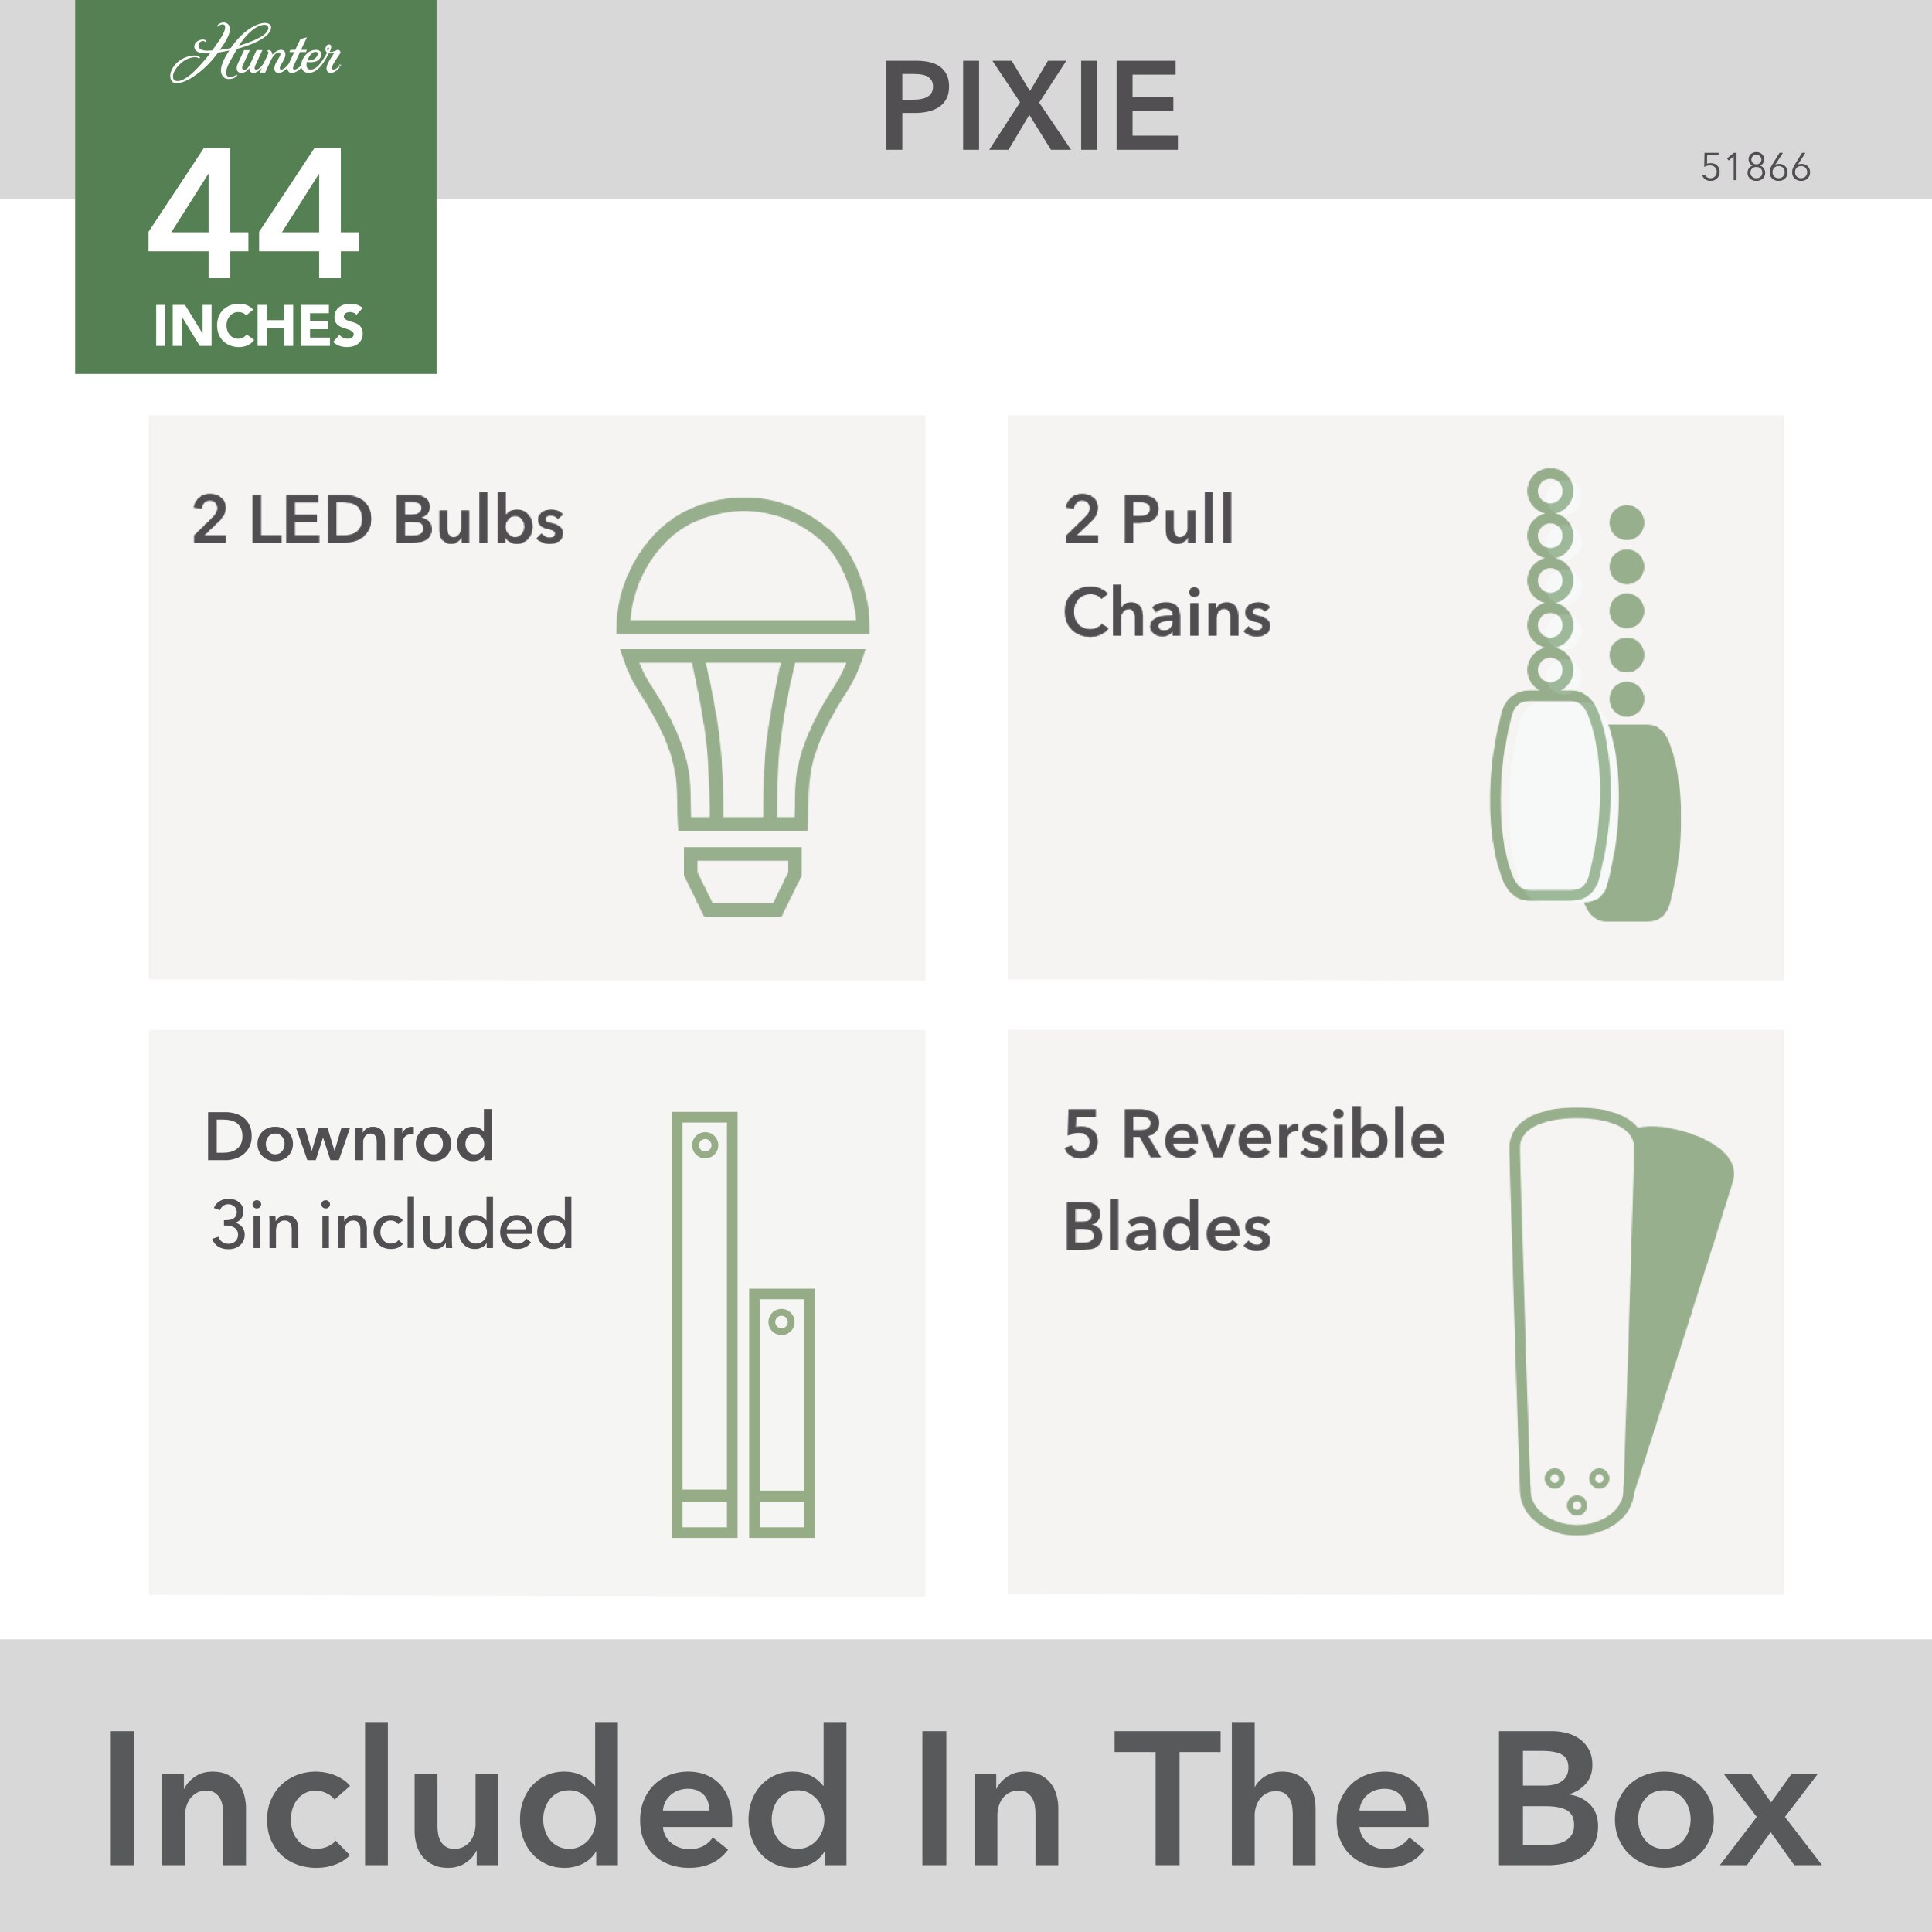 Pixie - COOL HUNTING®